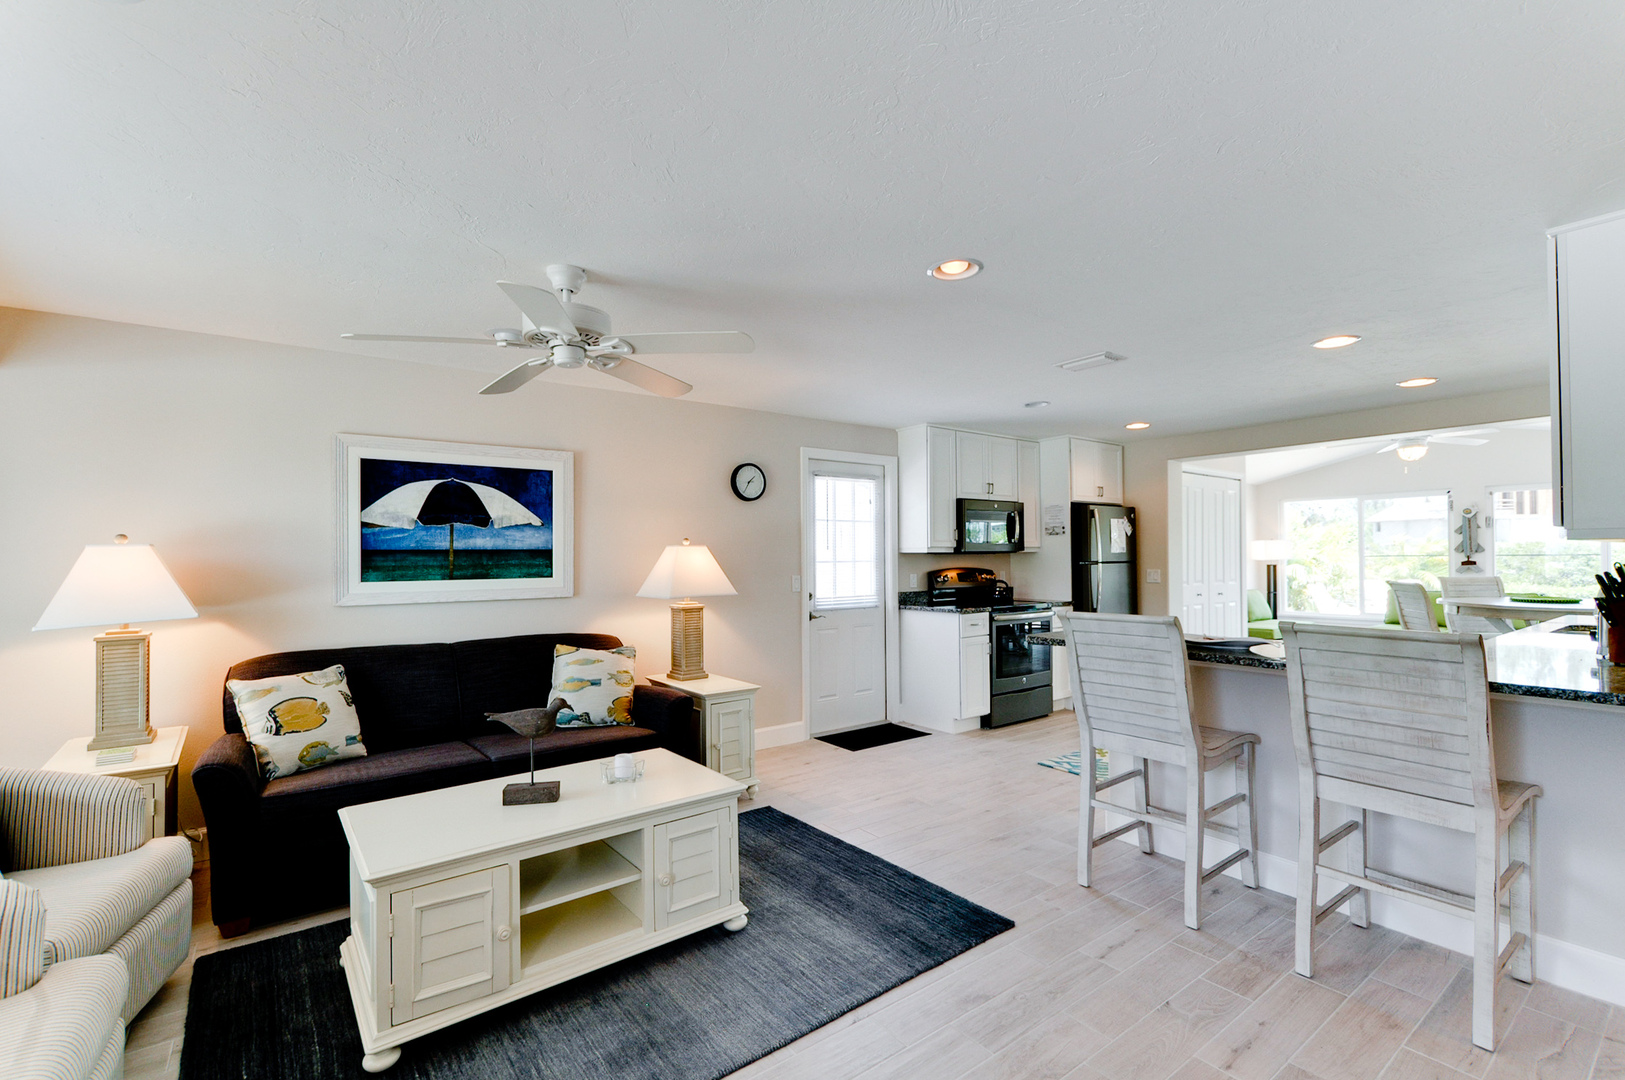 2 Pina Colada's A open concept view with living room, kitchen & dining table